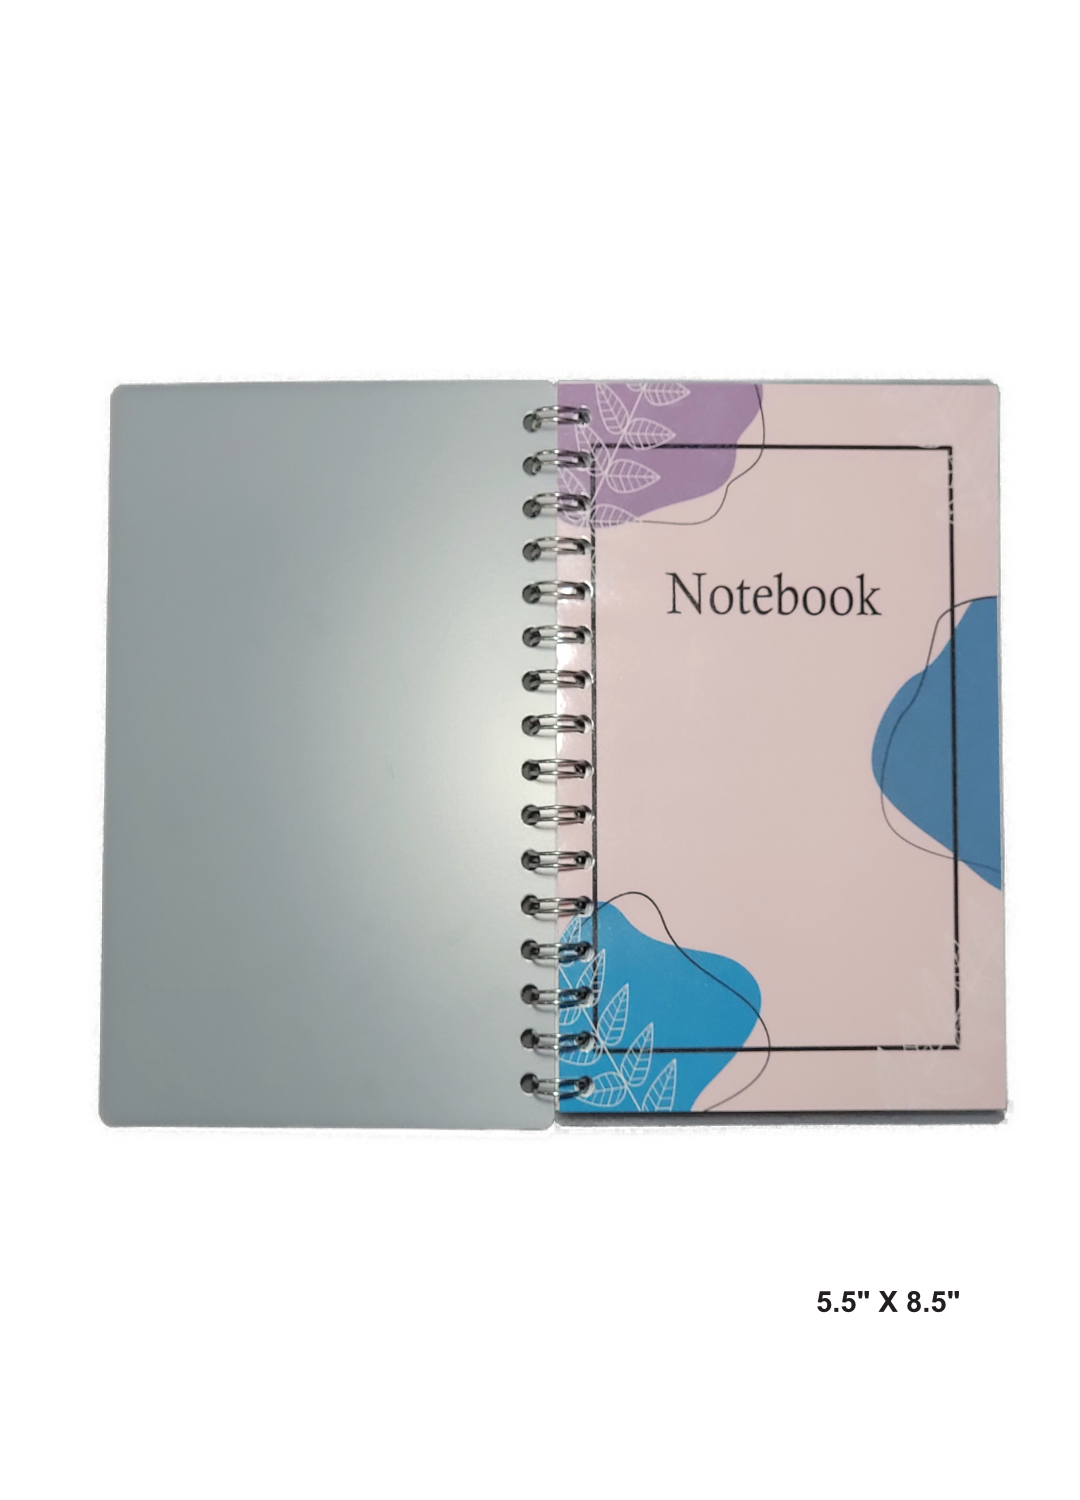 Image of hand-made 5.5" x 8.5" notebook with abstract colors and design's. The notebook's pages are lined for writing or journaling.